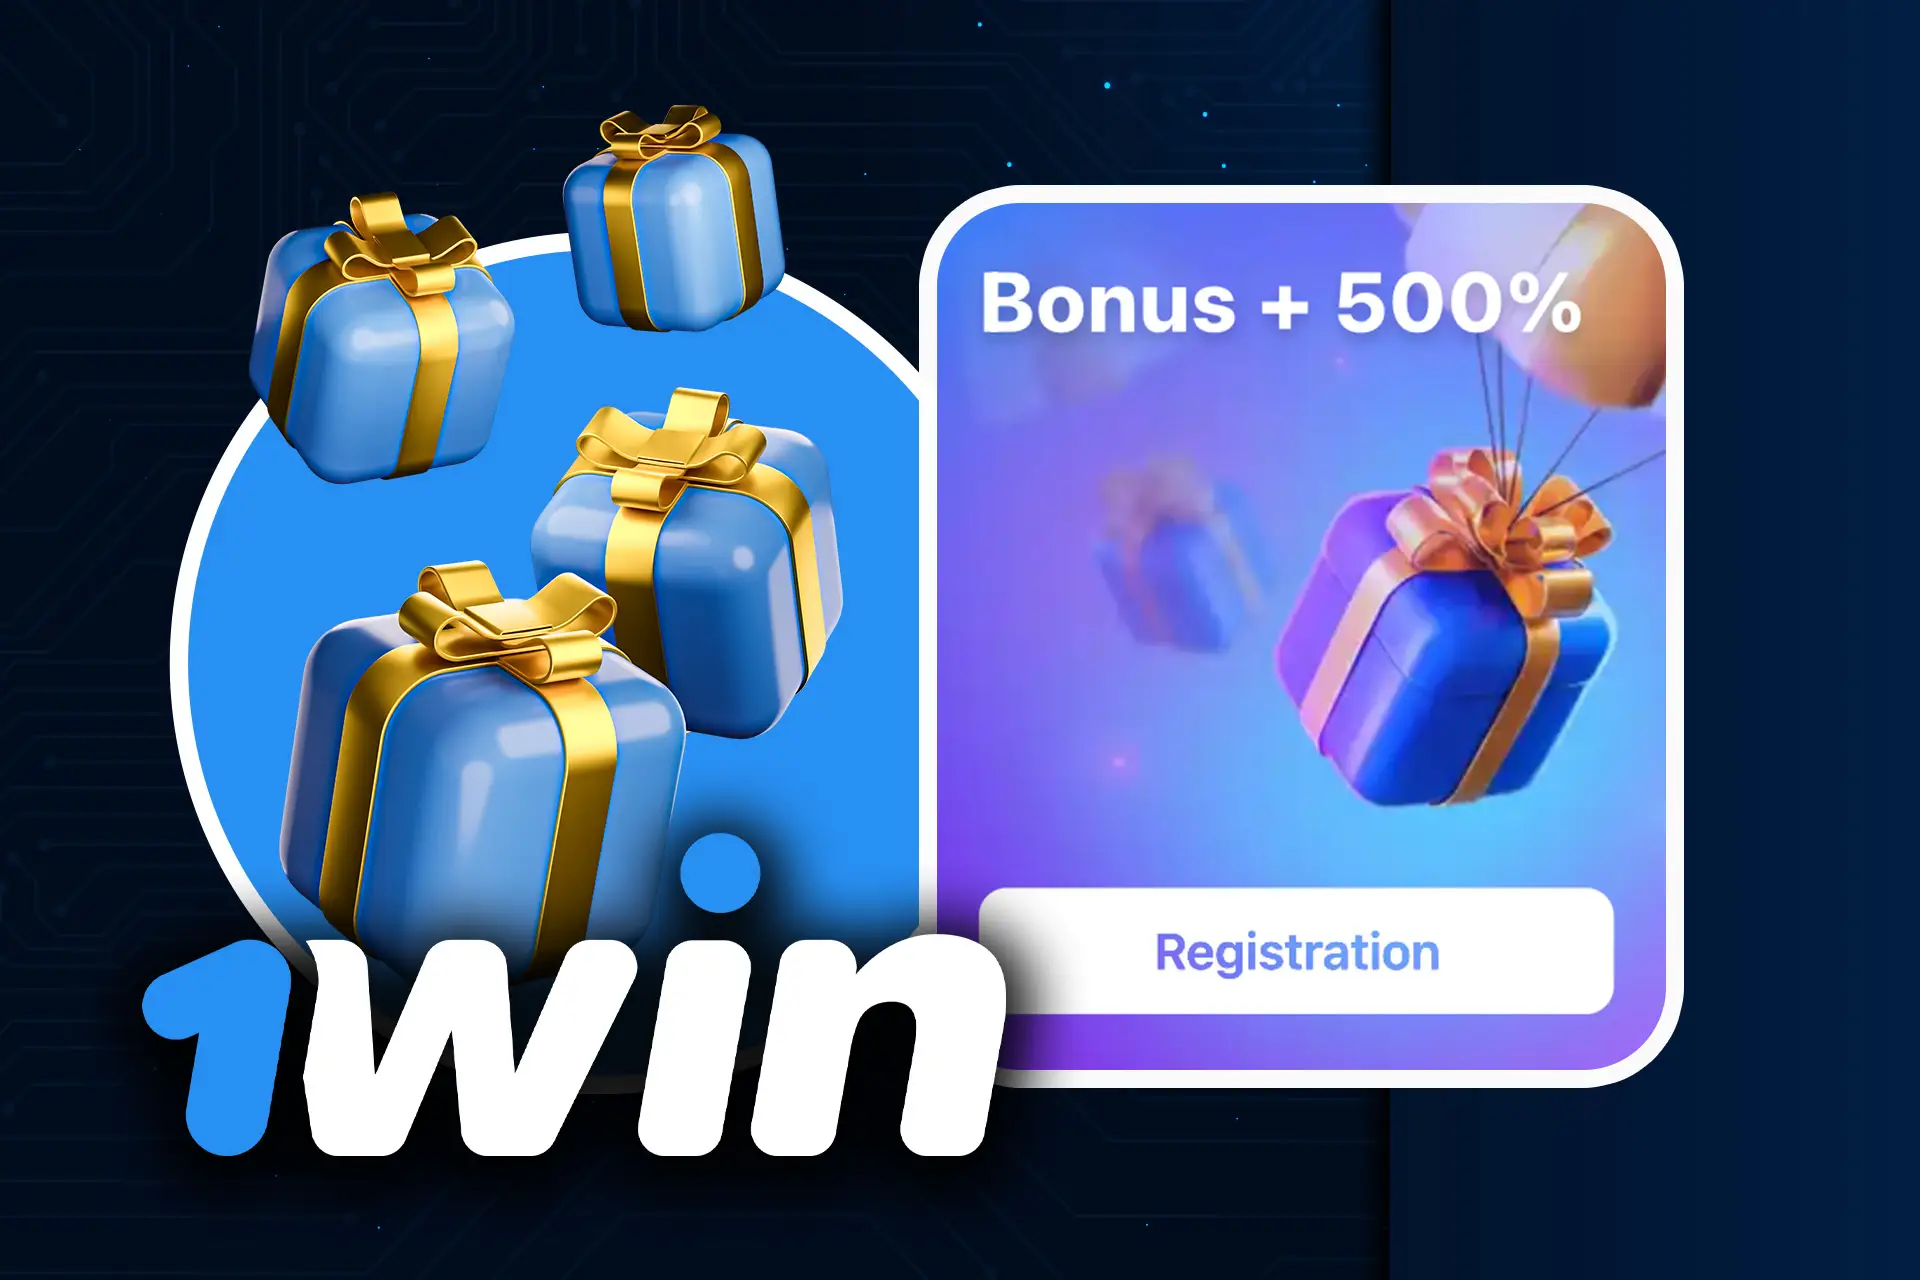 1win offers a generous welcome bonus of 500% right after your first deposit.